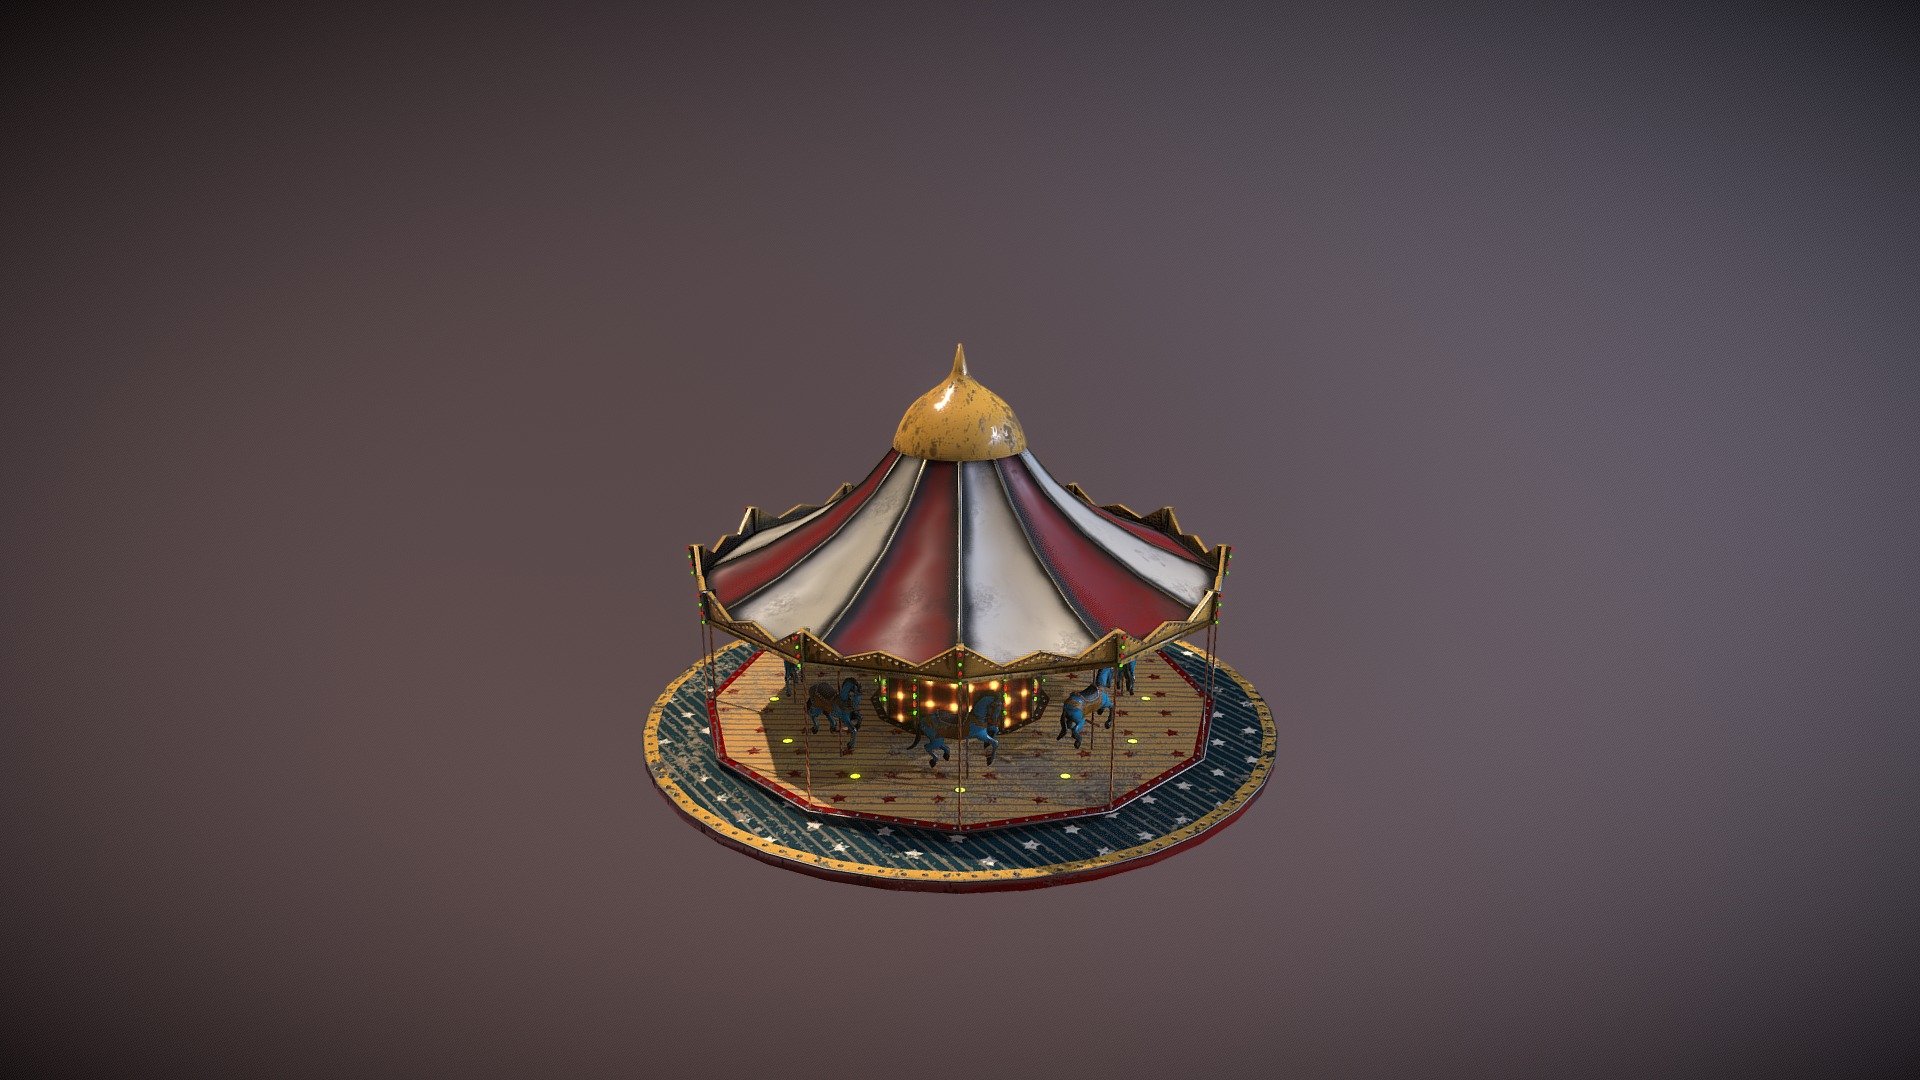 The Carousel made for a park of horrors. Blender and Substance Painter were used in Modeling and Painting 3d model